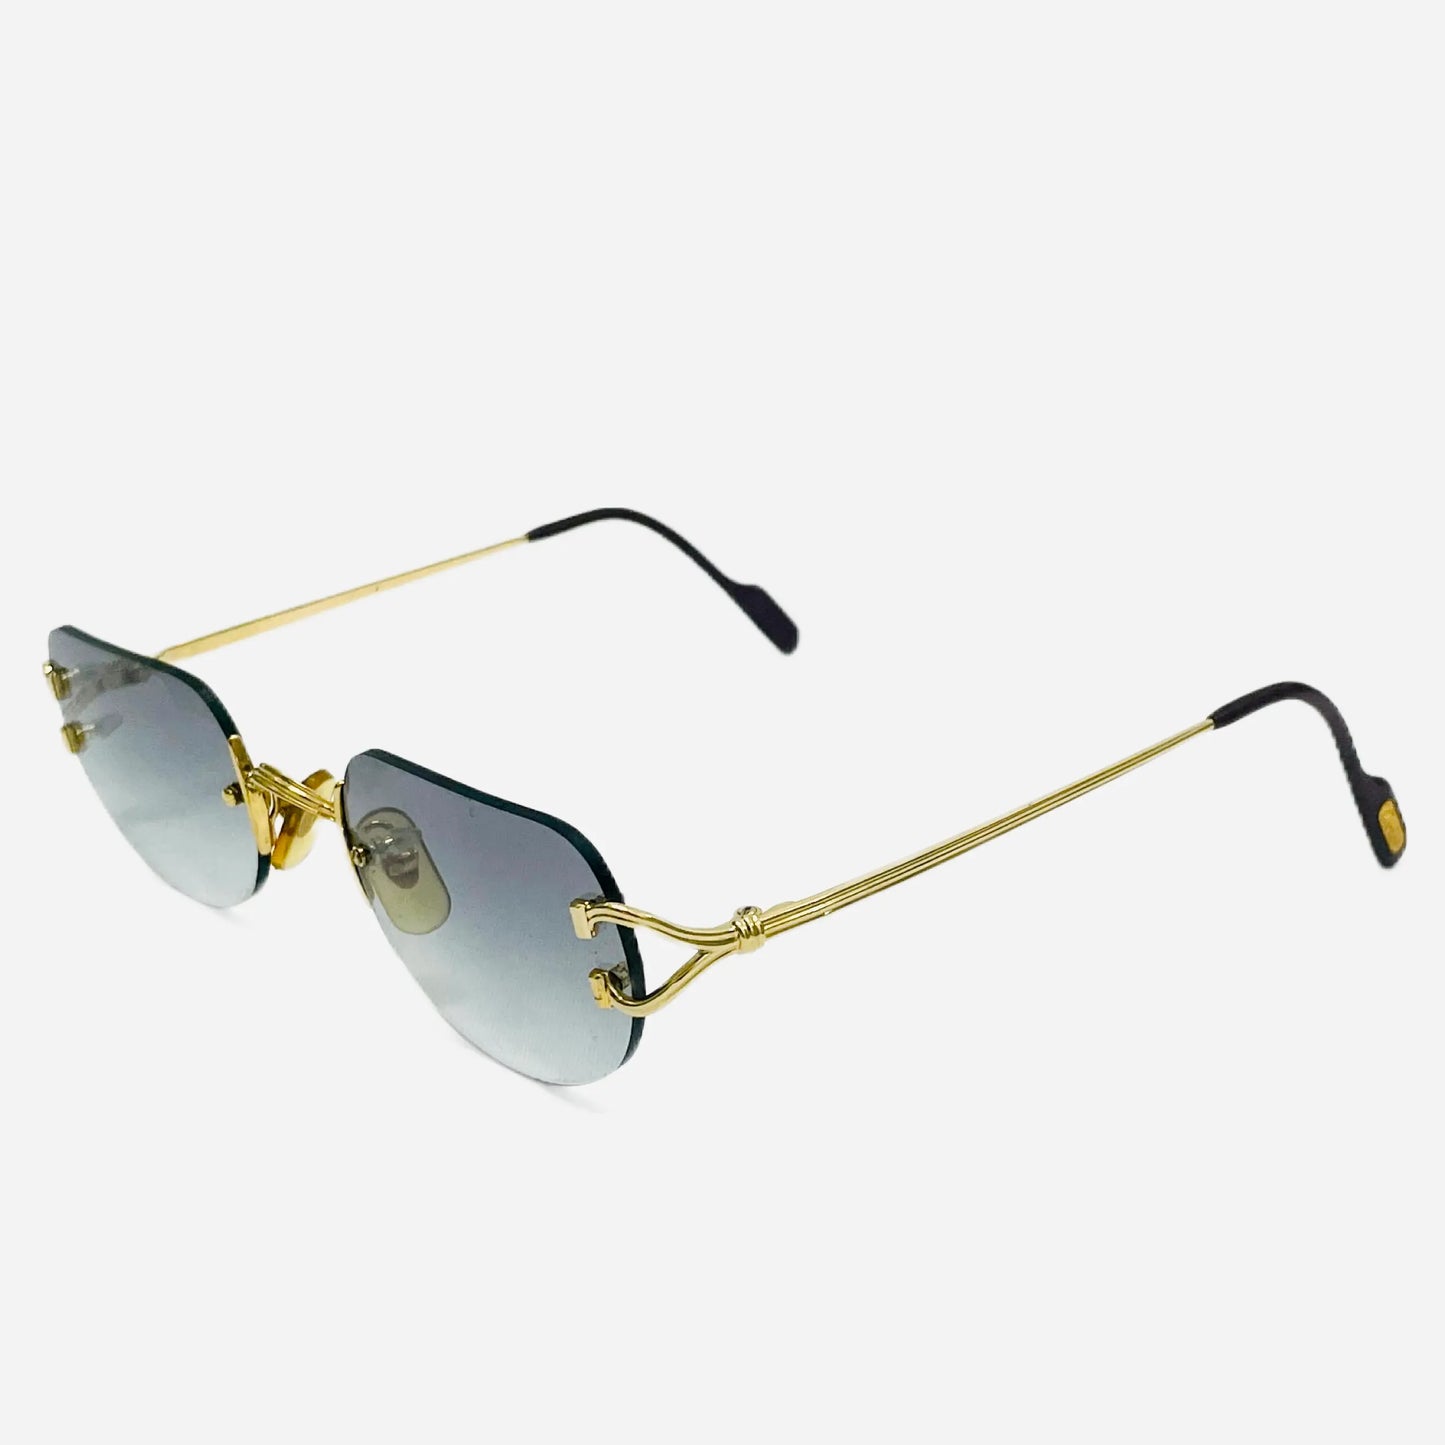 Vintage-Cartier-Big-C-Sonnenbrille-Sunglasses-22CT-Gold-Plated-the-seekers-front-side